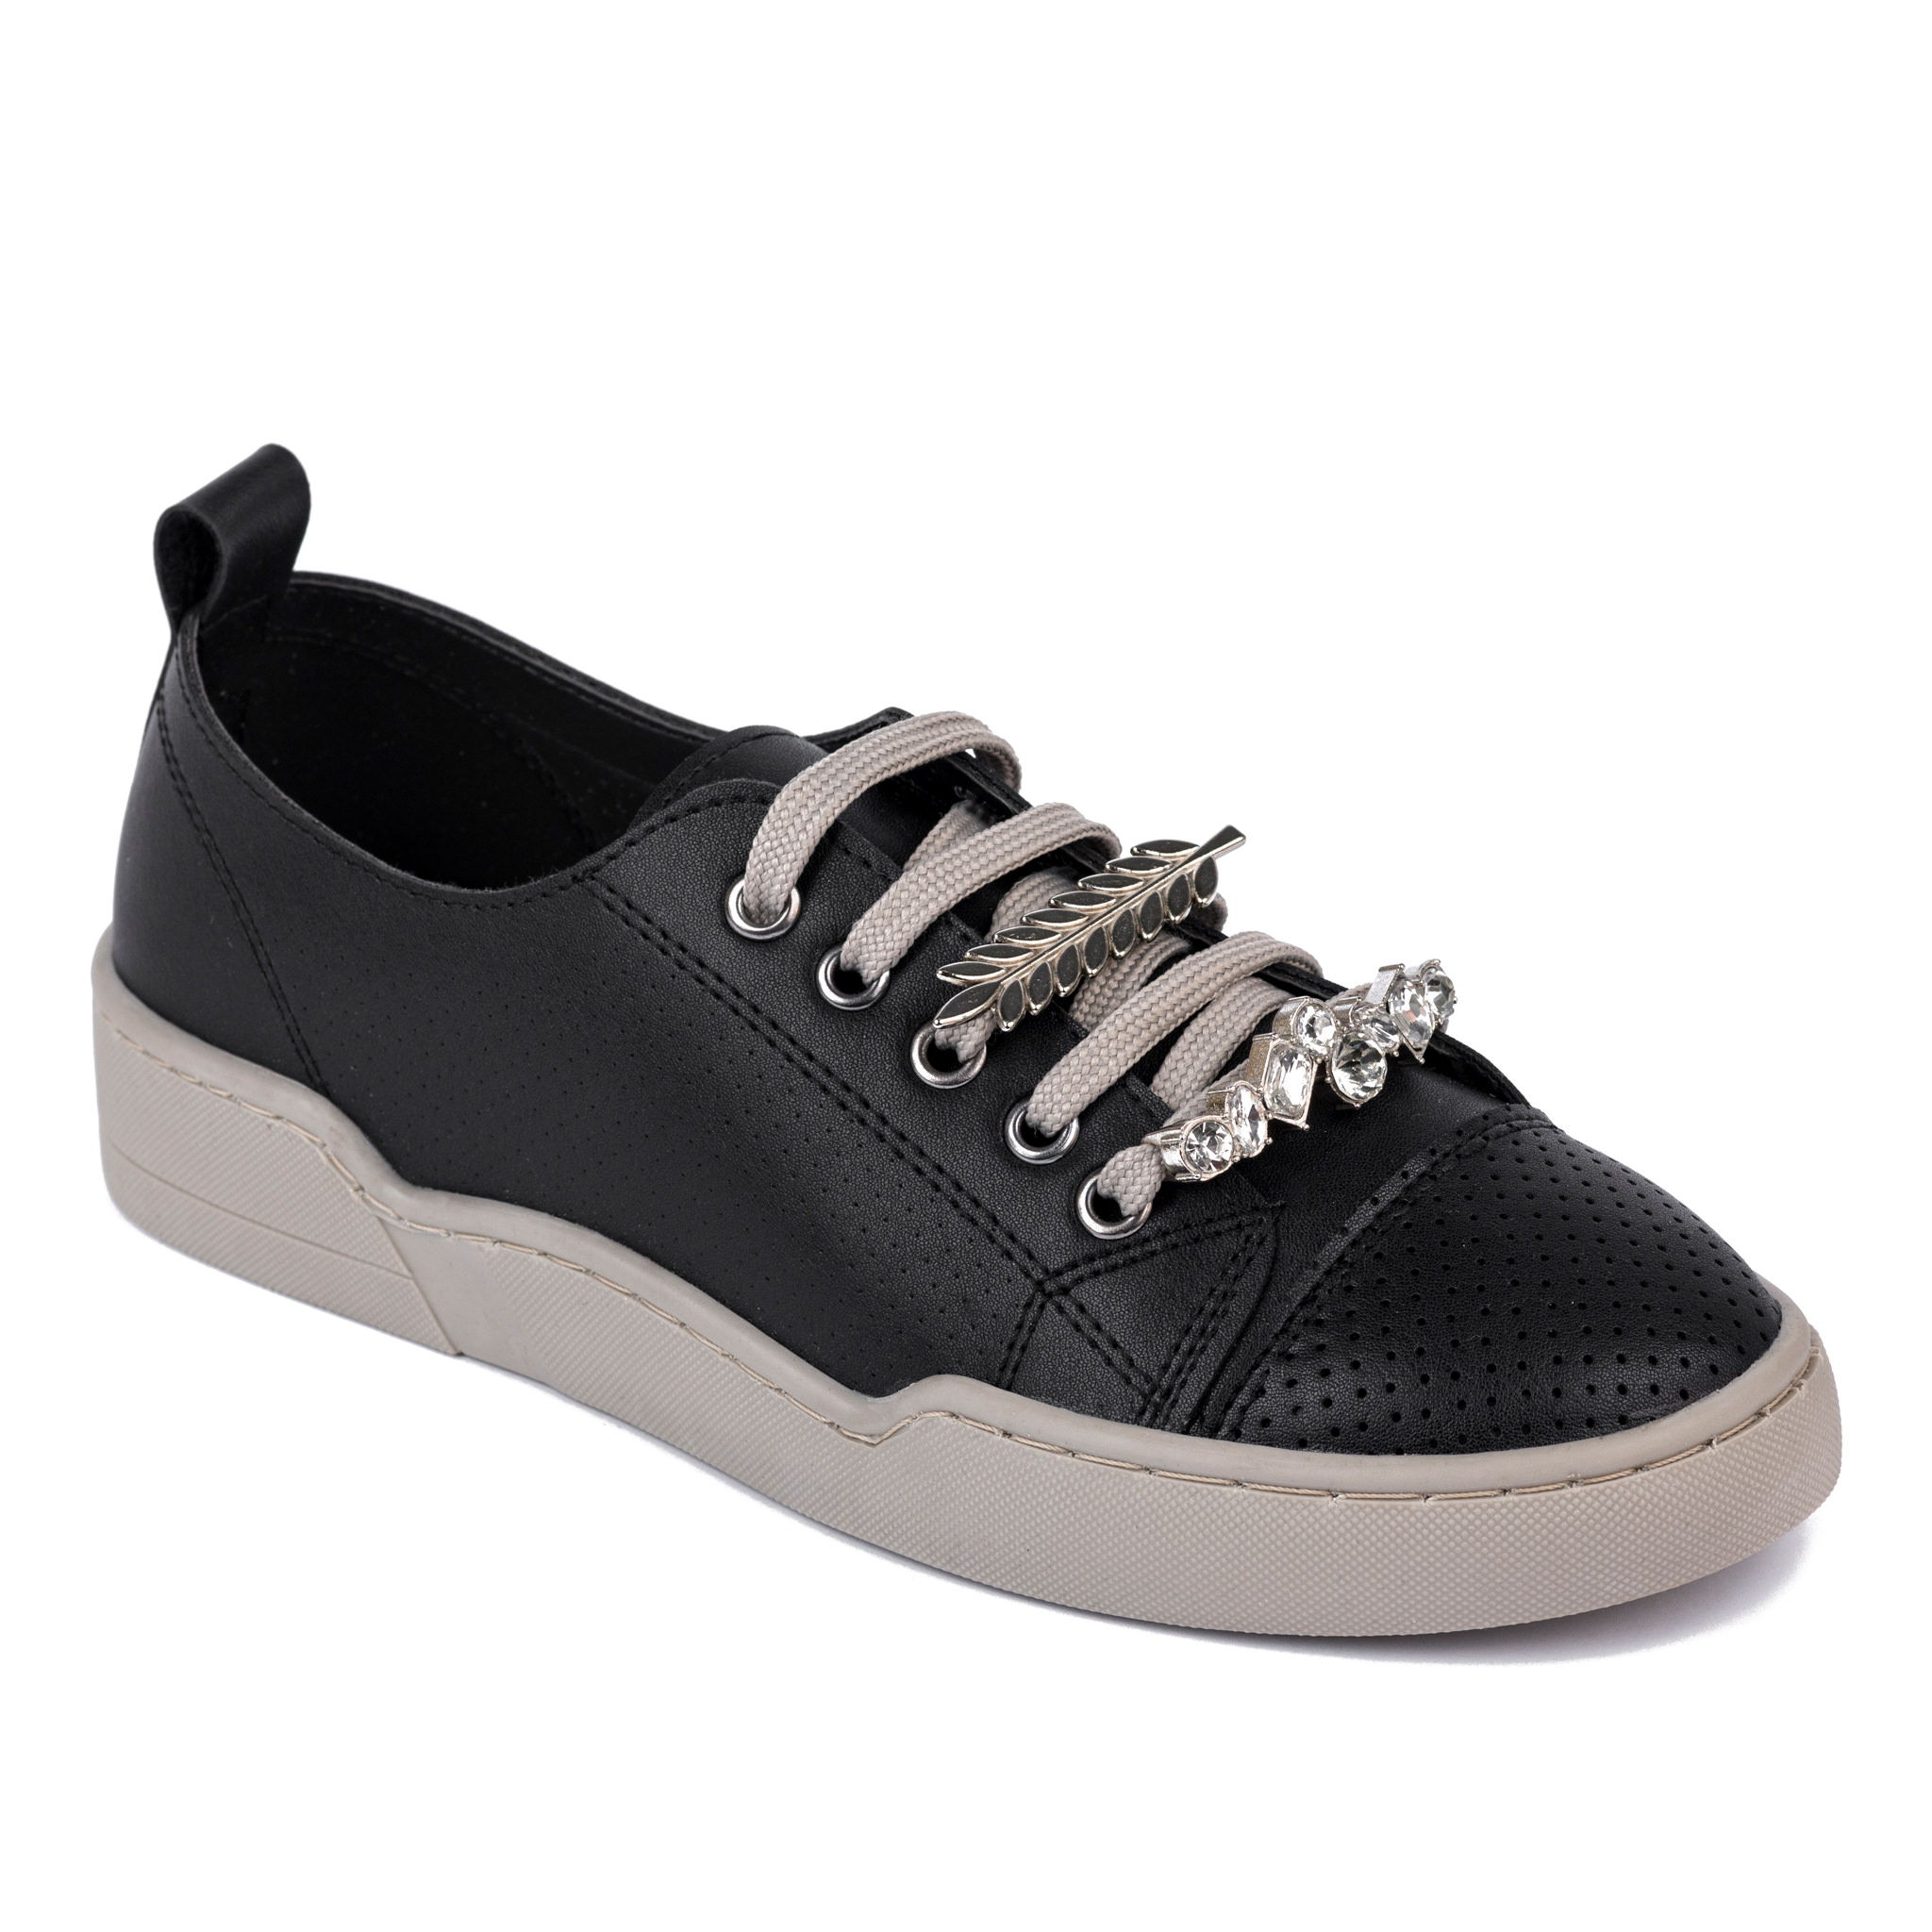 SHALLOW SNEAKERS WITH ORNAMENTS - BLACK